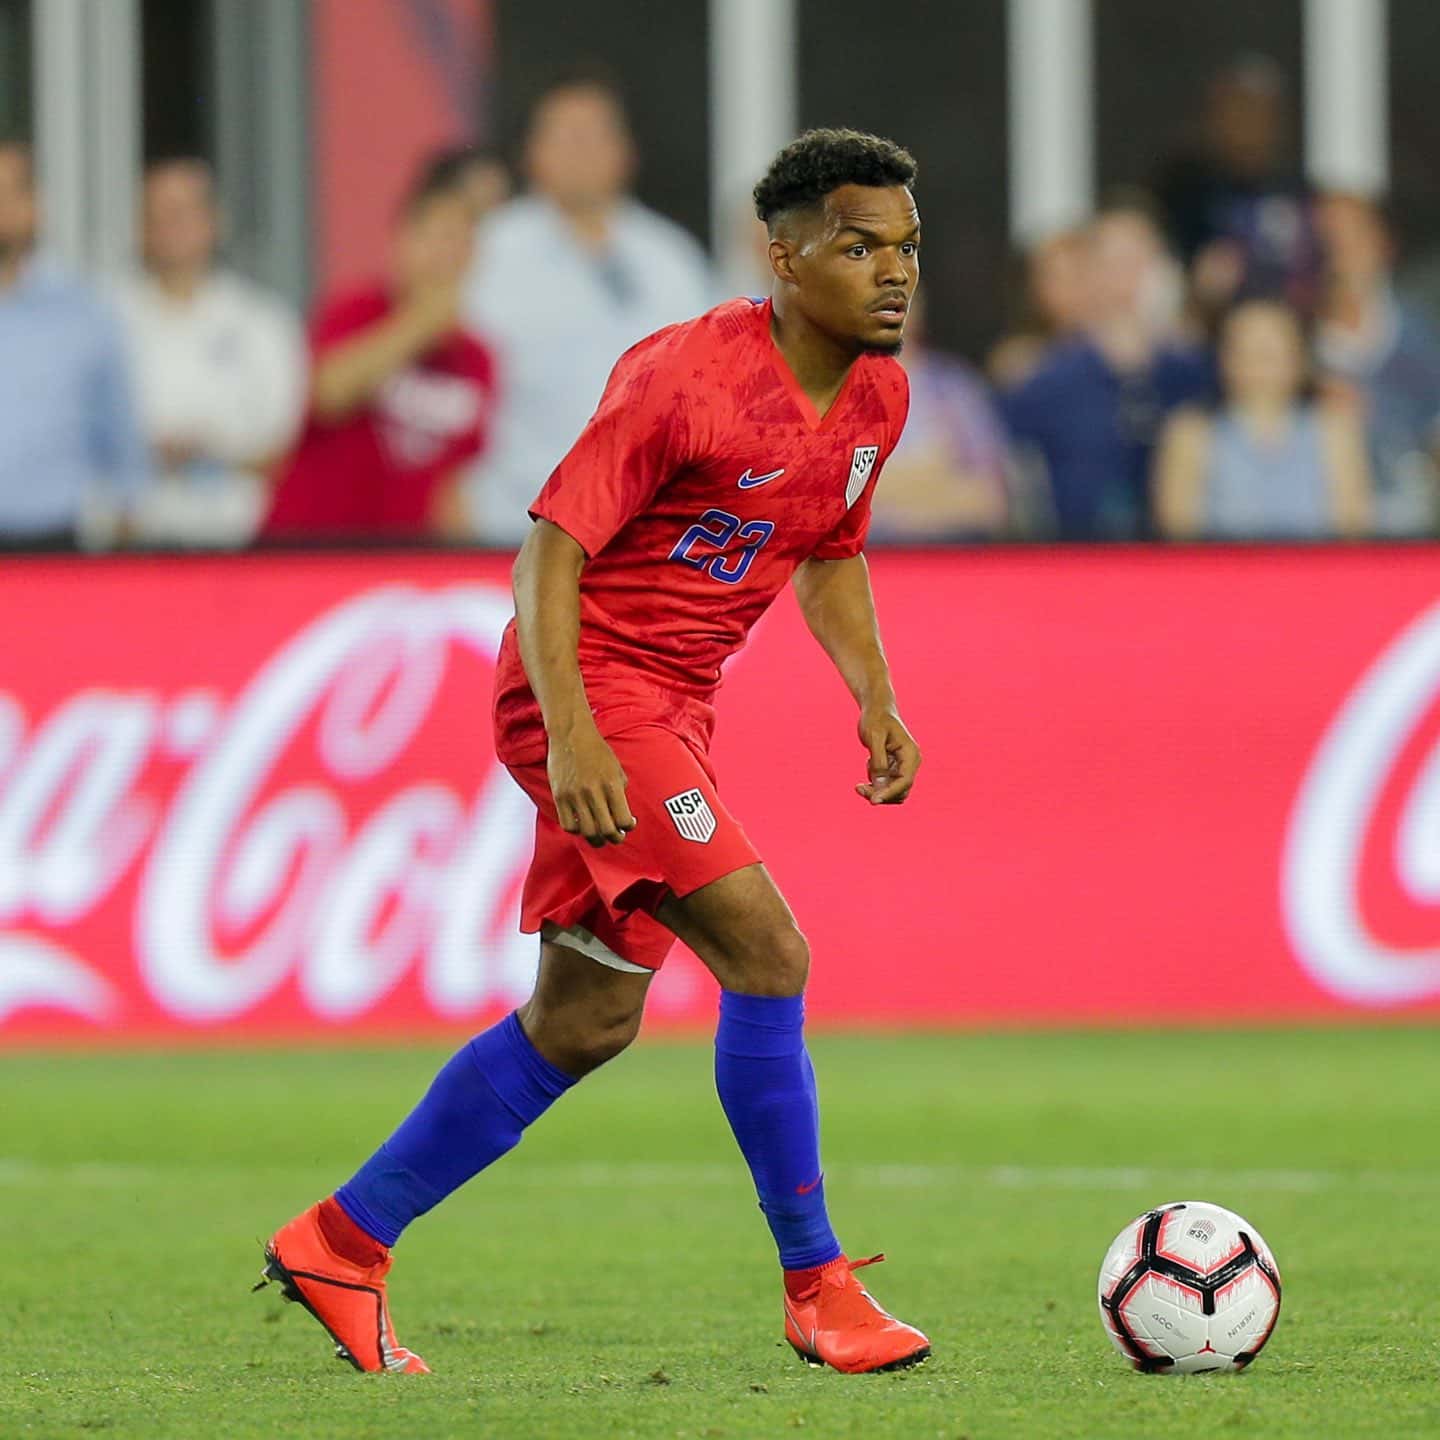 Injury Forces Duane Holmes to Withdraw from U.S. Men’s National Team Roster for 2019 Concacaf Gold Cup